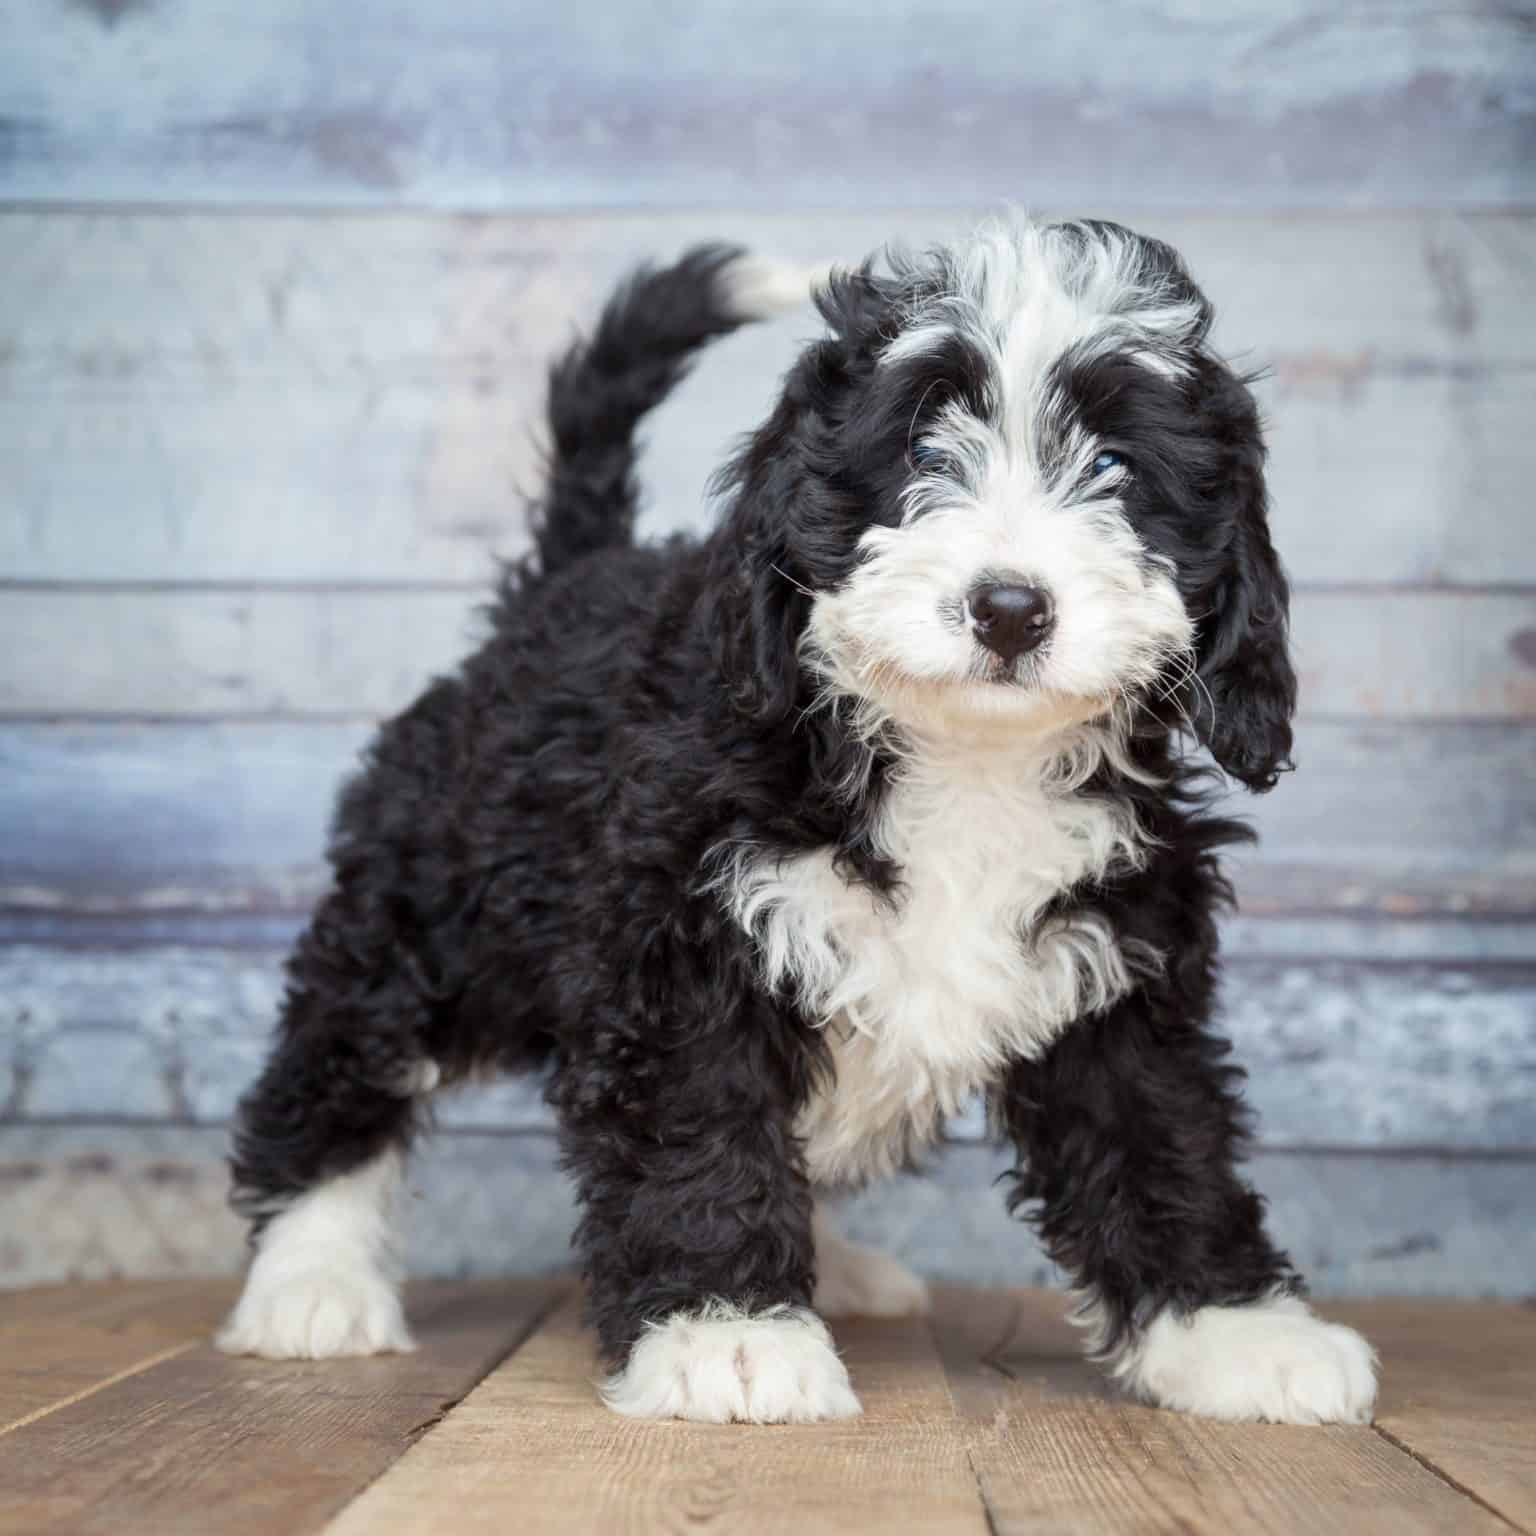 Bernedoodle, a Bernese Mountain Dog-Poodle mix, is gentle, goofy